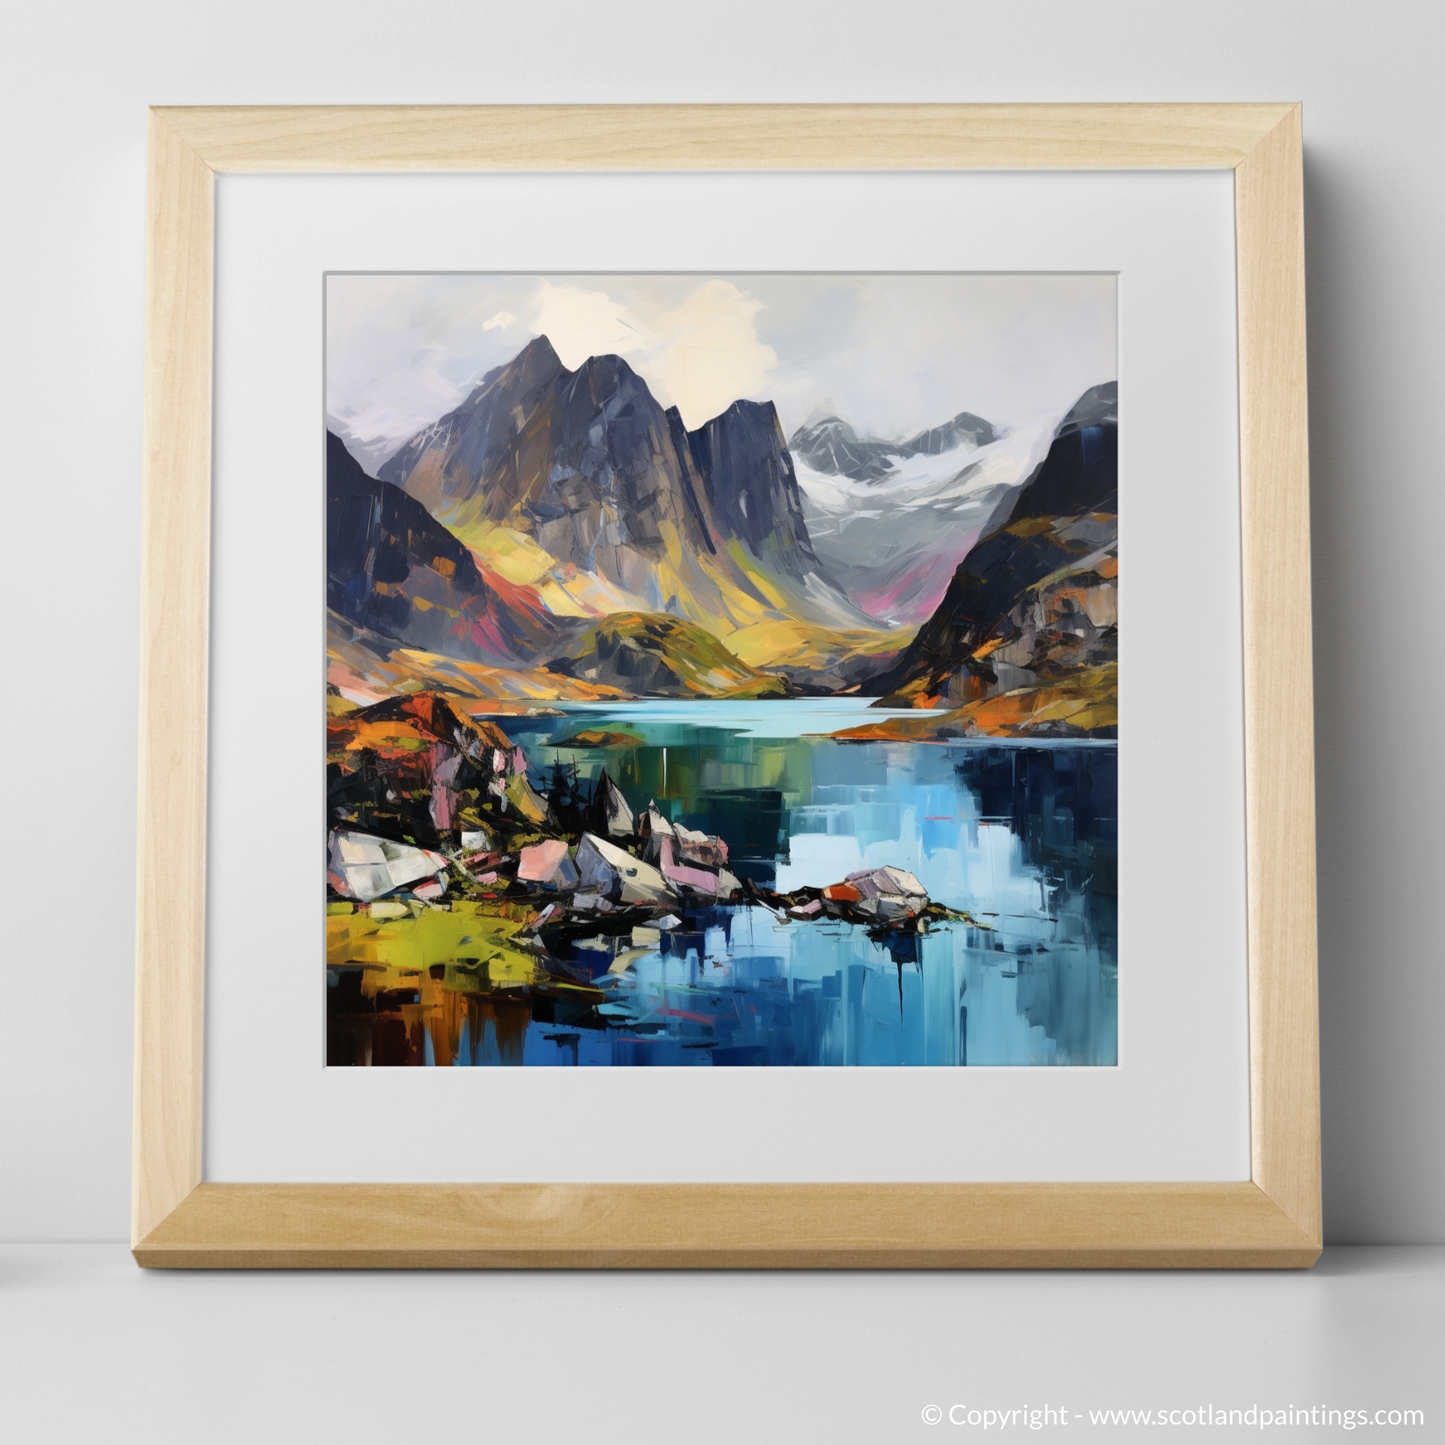 Art Print of Loch Coruisk, Isle of Skye with a natural frame